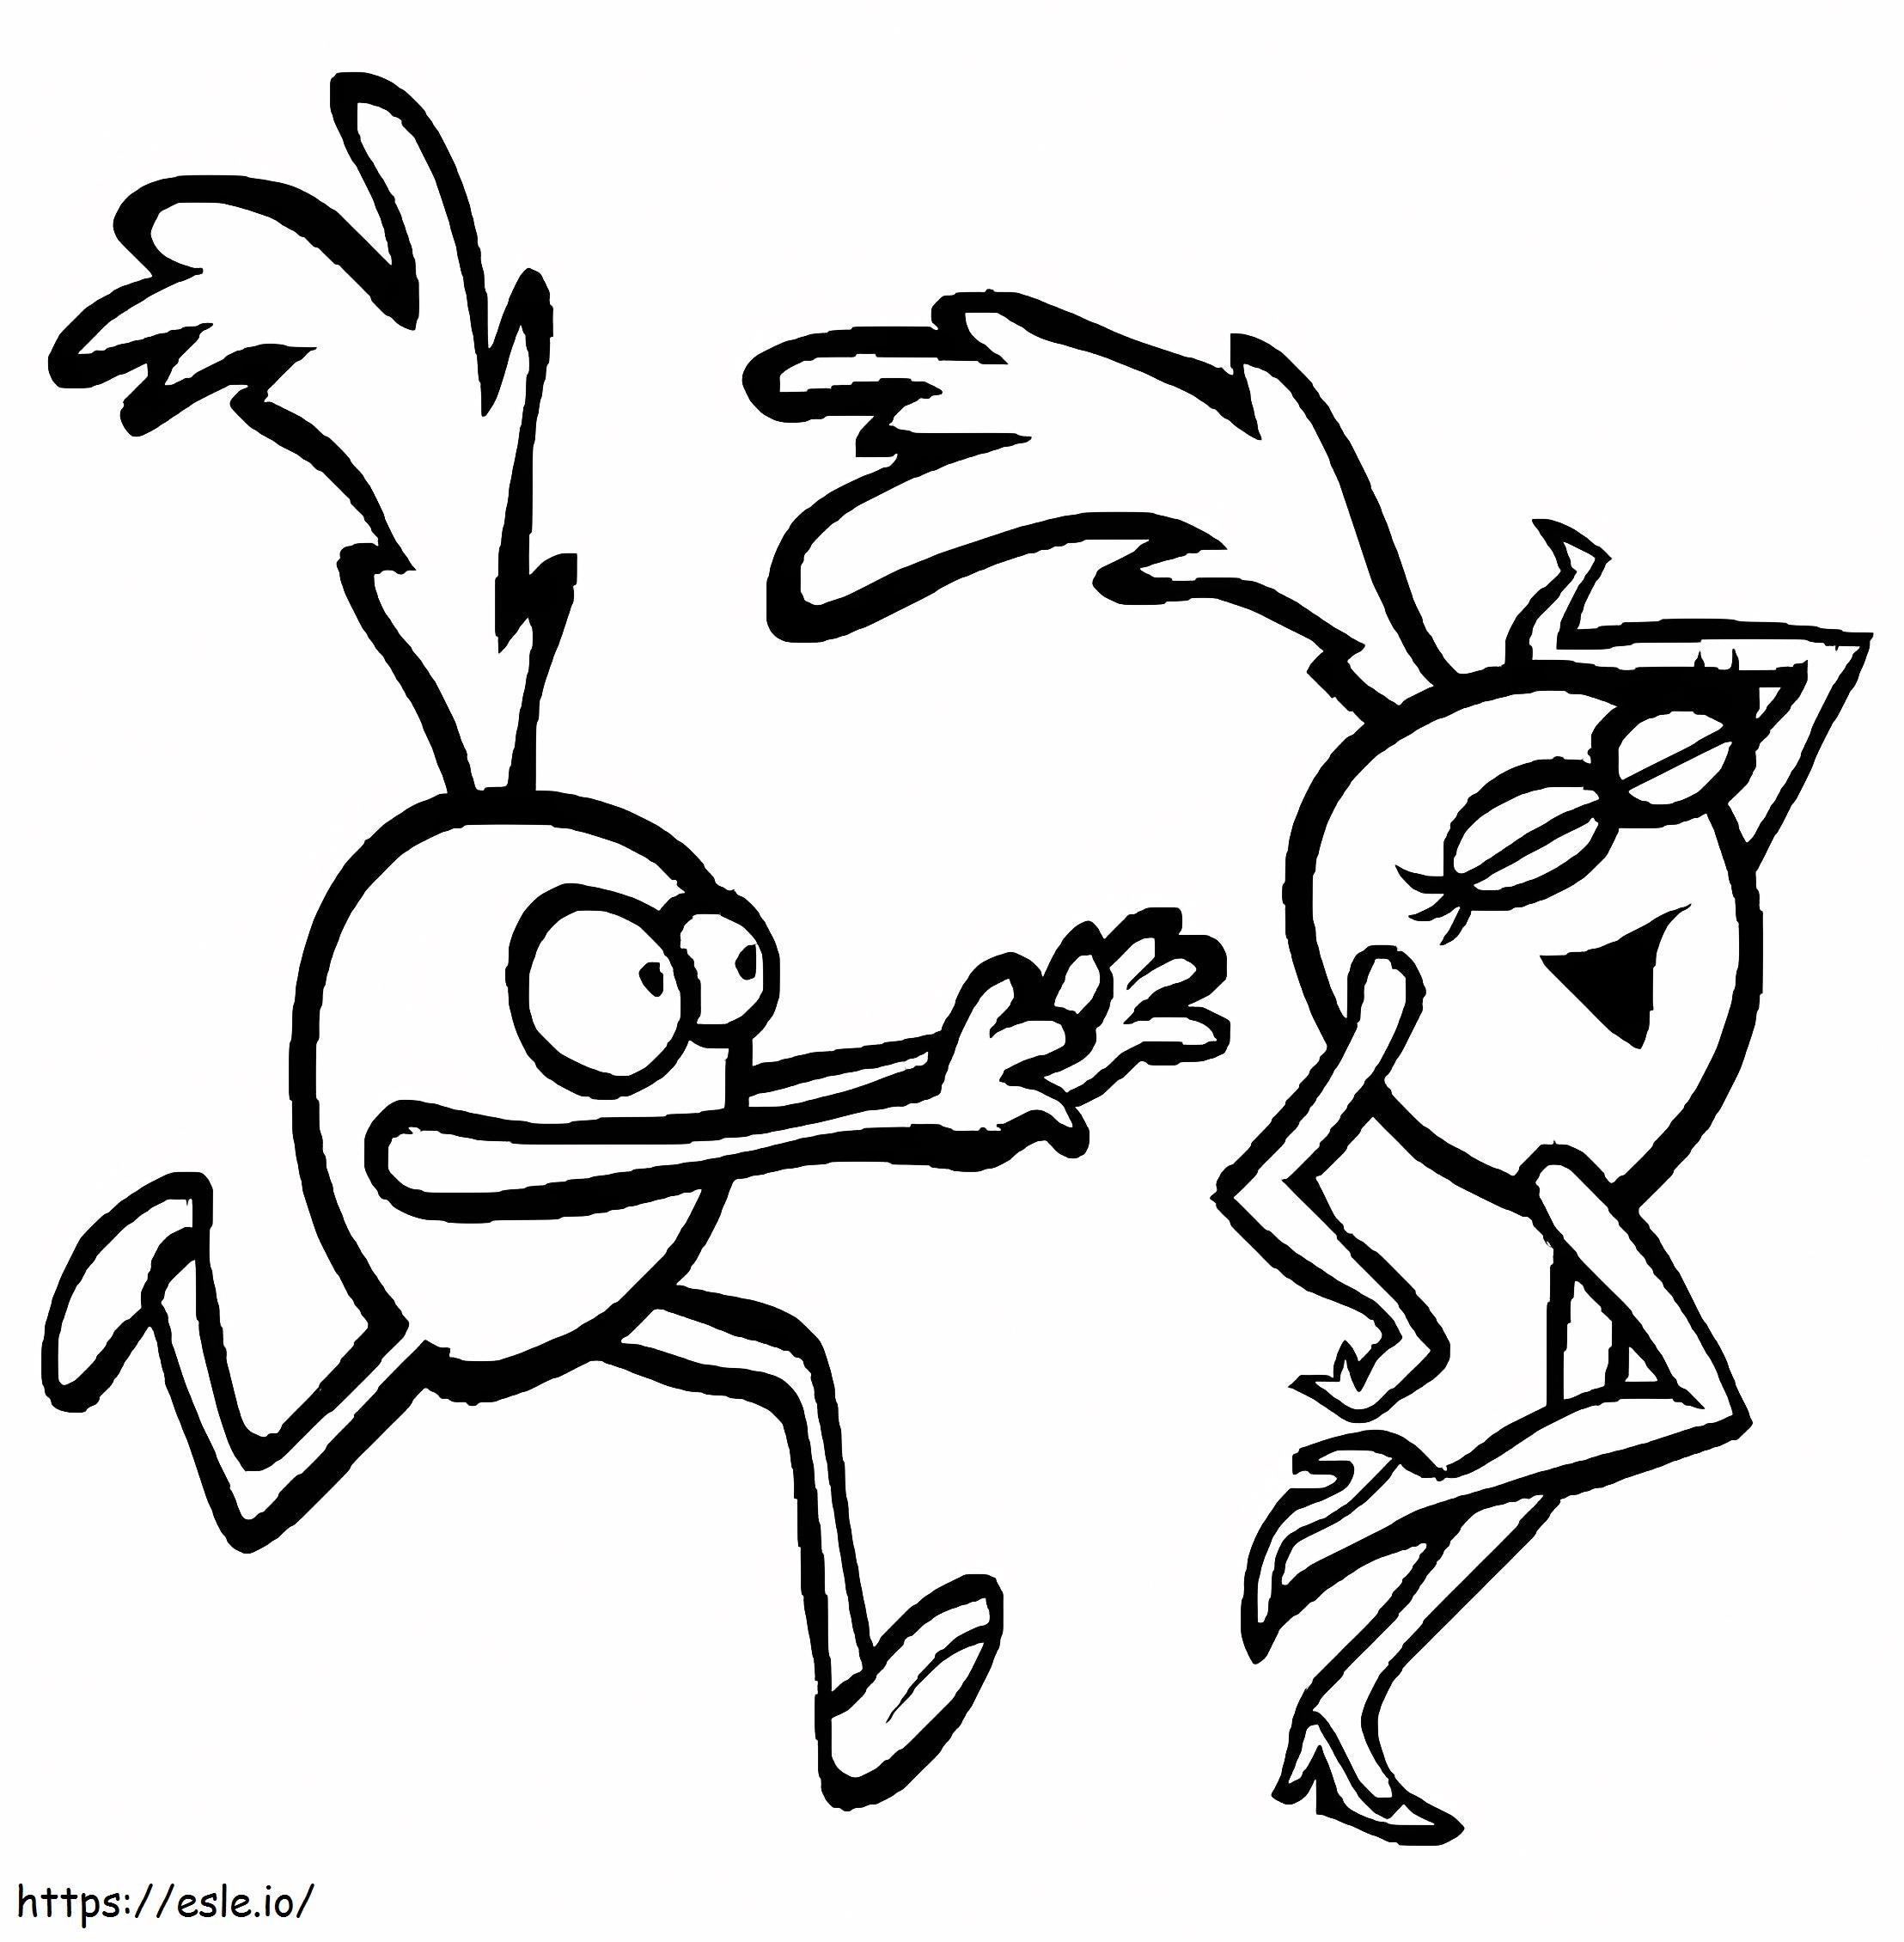 Running Two Carrots coloring page